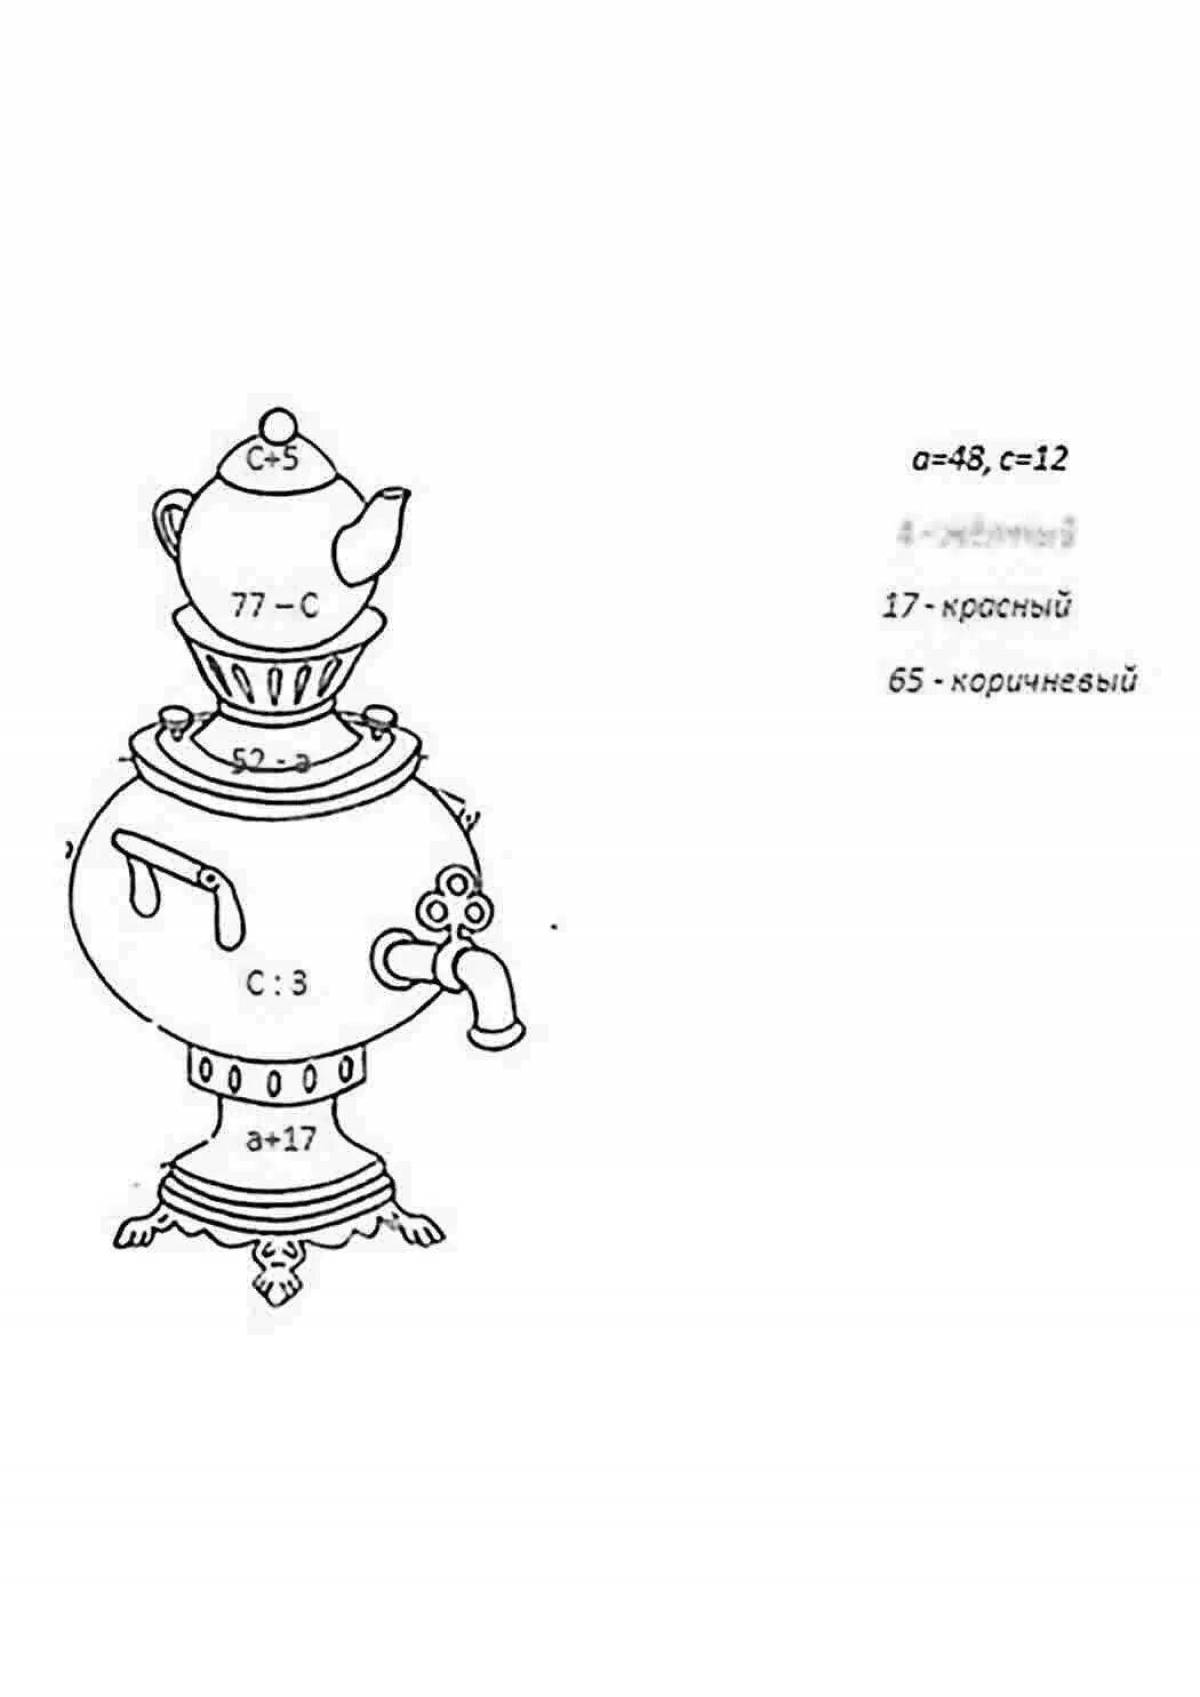 A fascinating coloring of the samovar